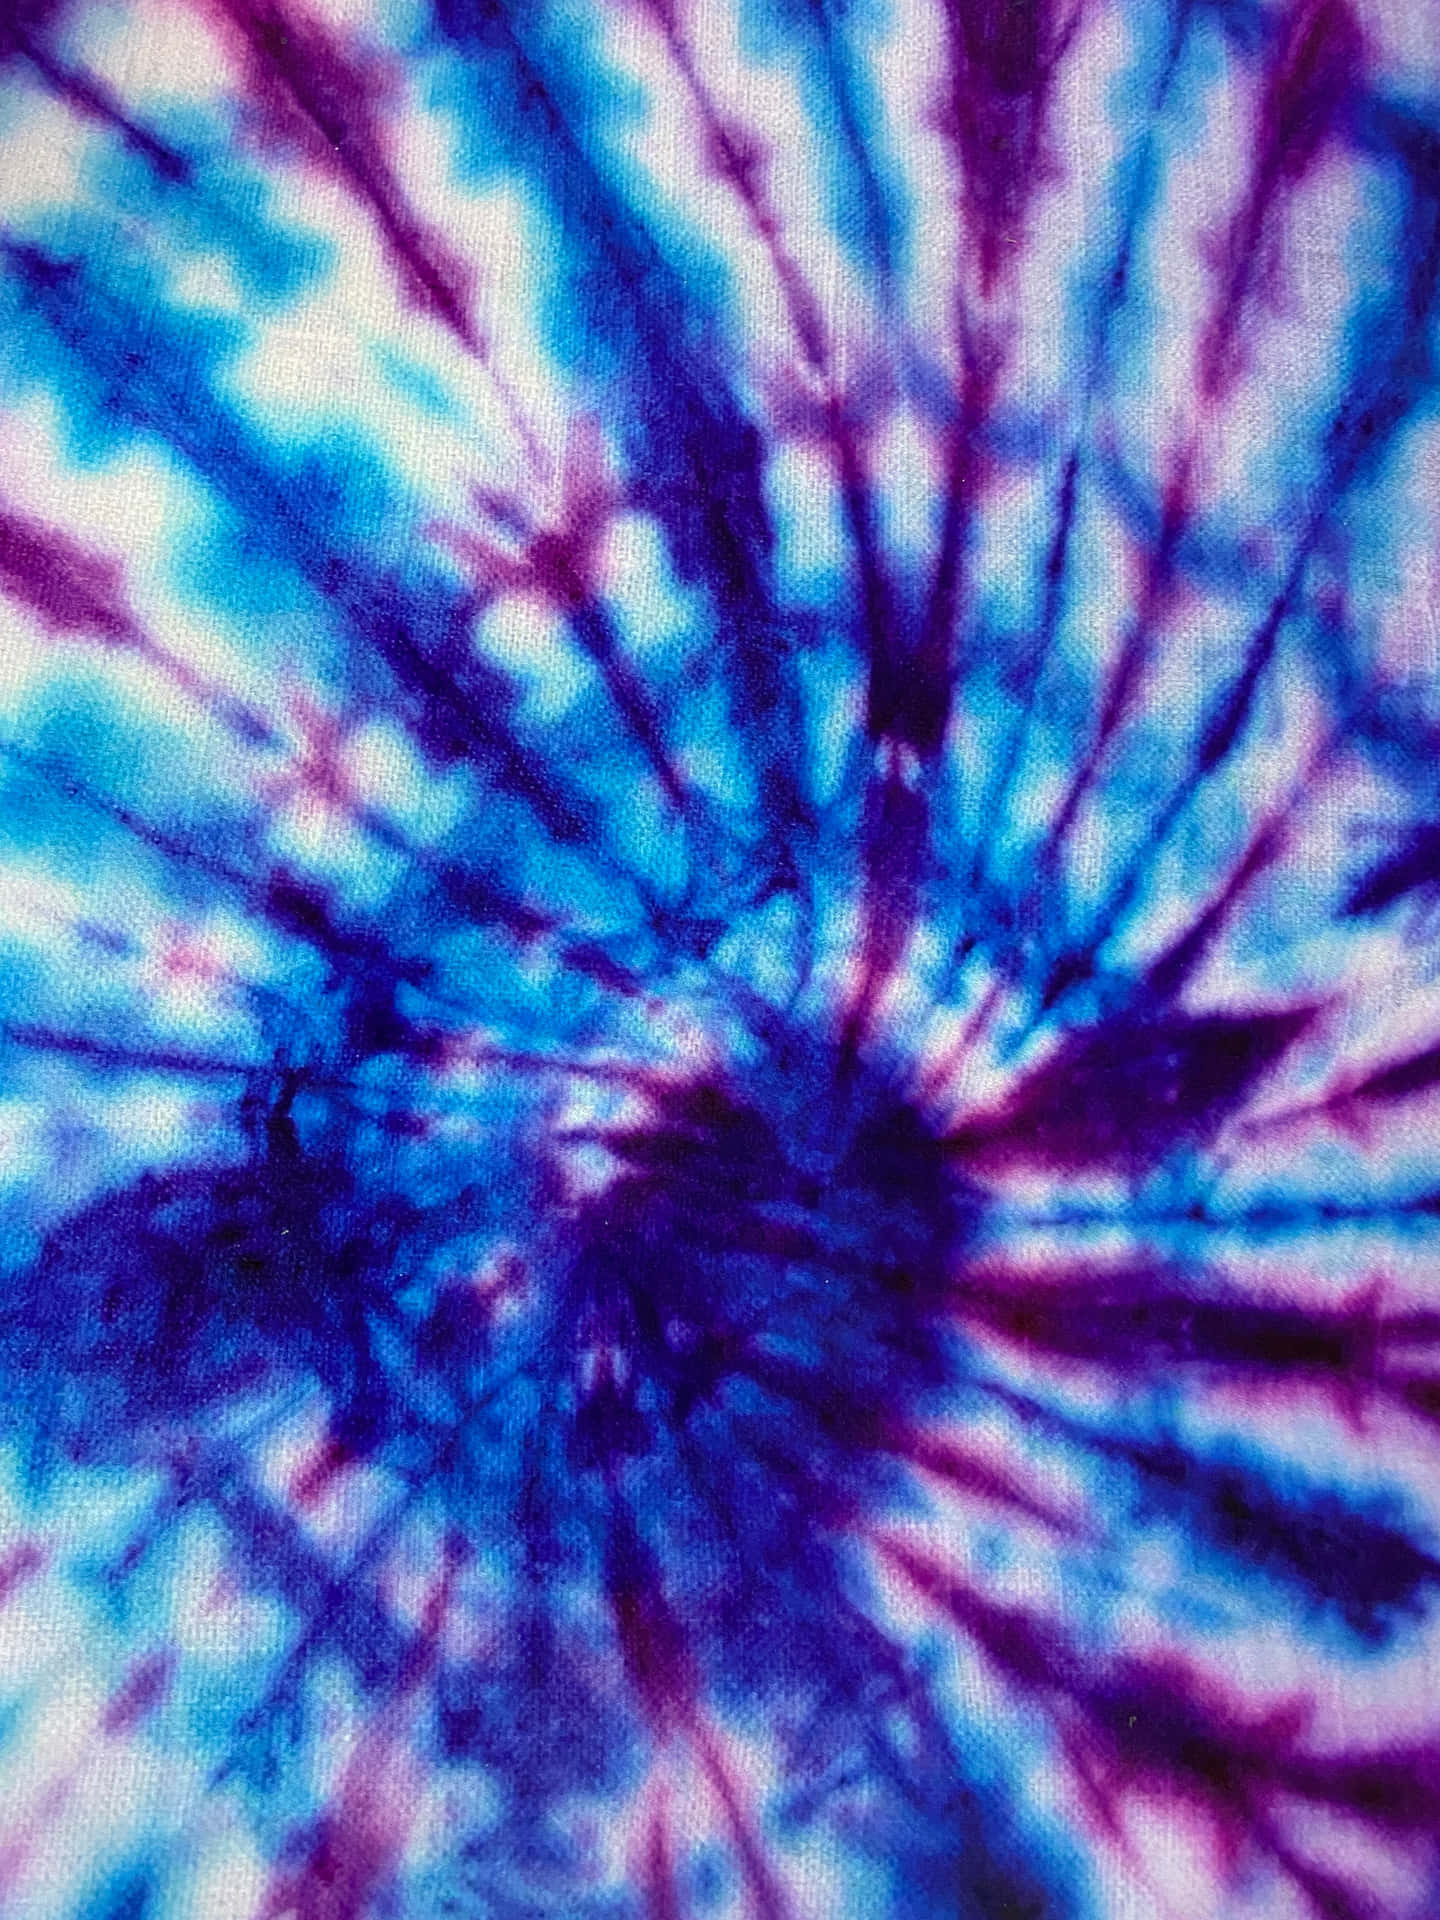 Vibrant blue tie dye patterns add a splash of color to any outfit Wallpaper